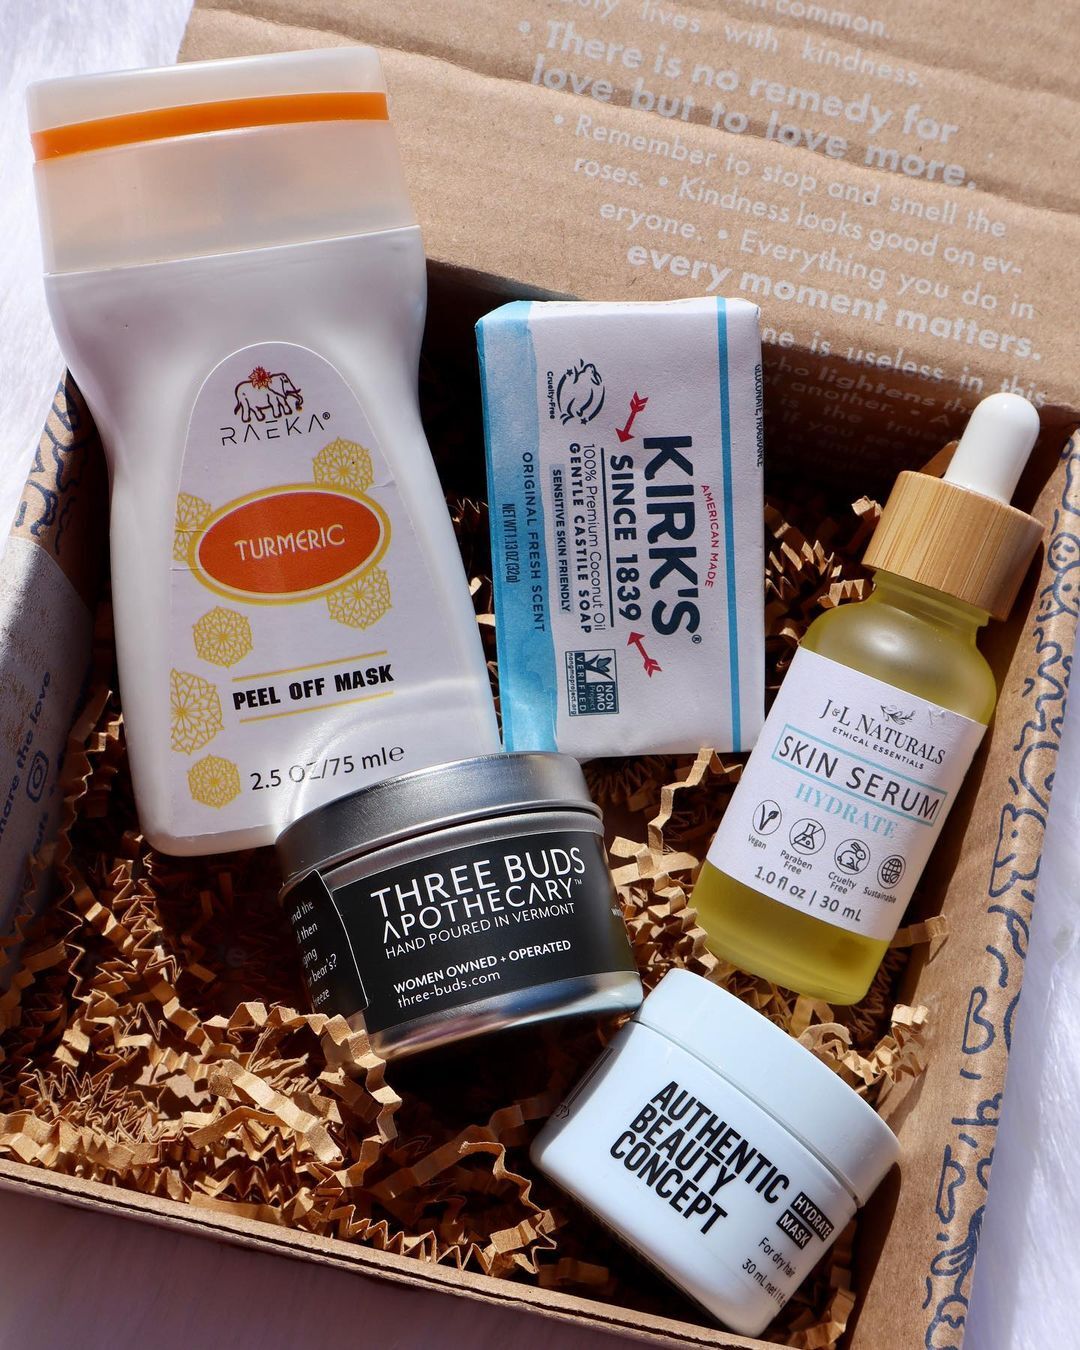 Vegancuts Snack and Beauty Subscription Box Bundle - 6 Month Plan